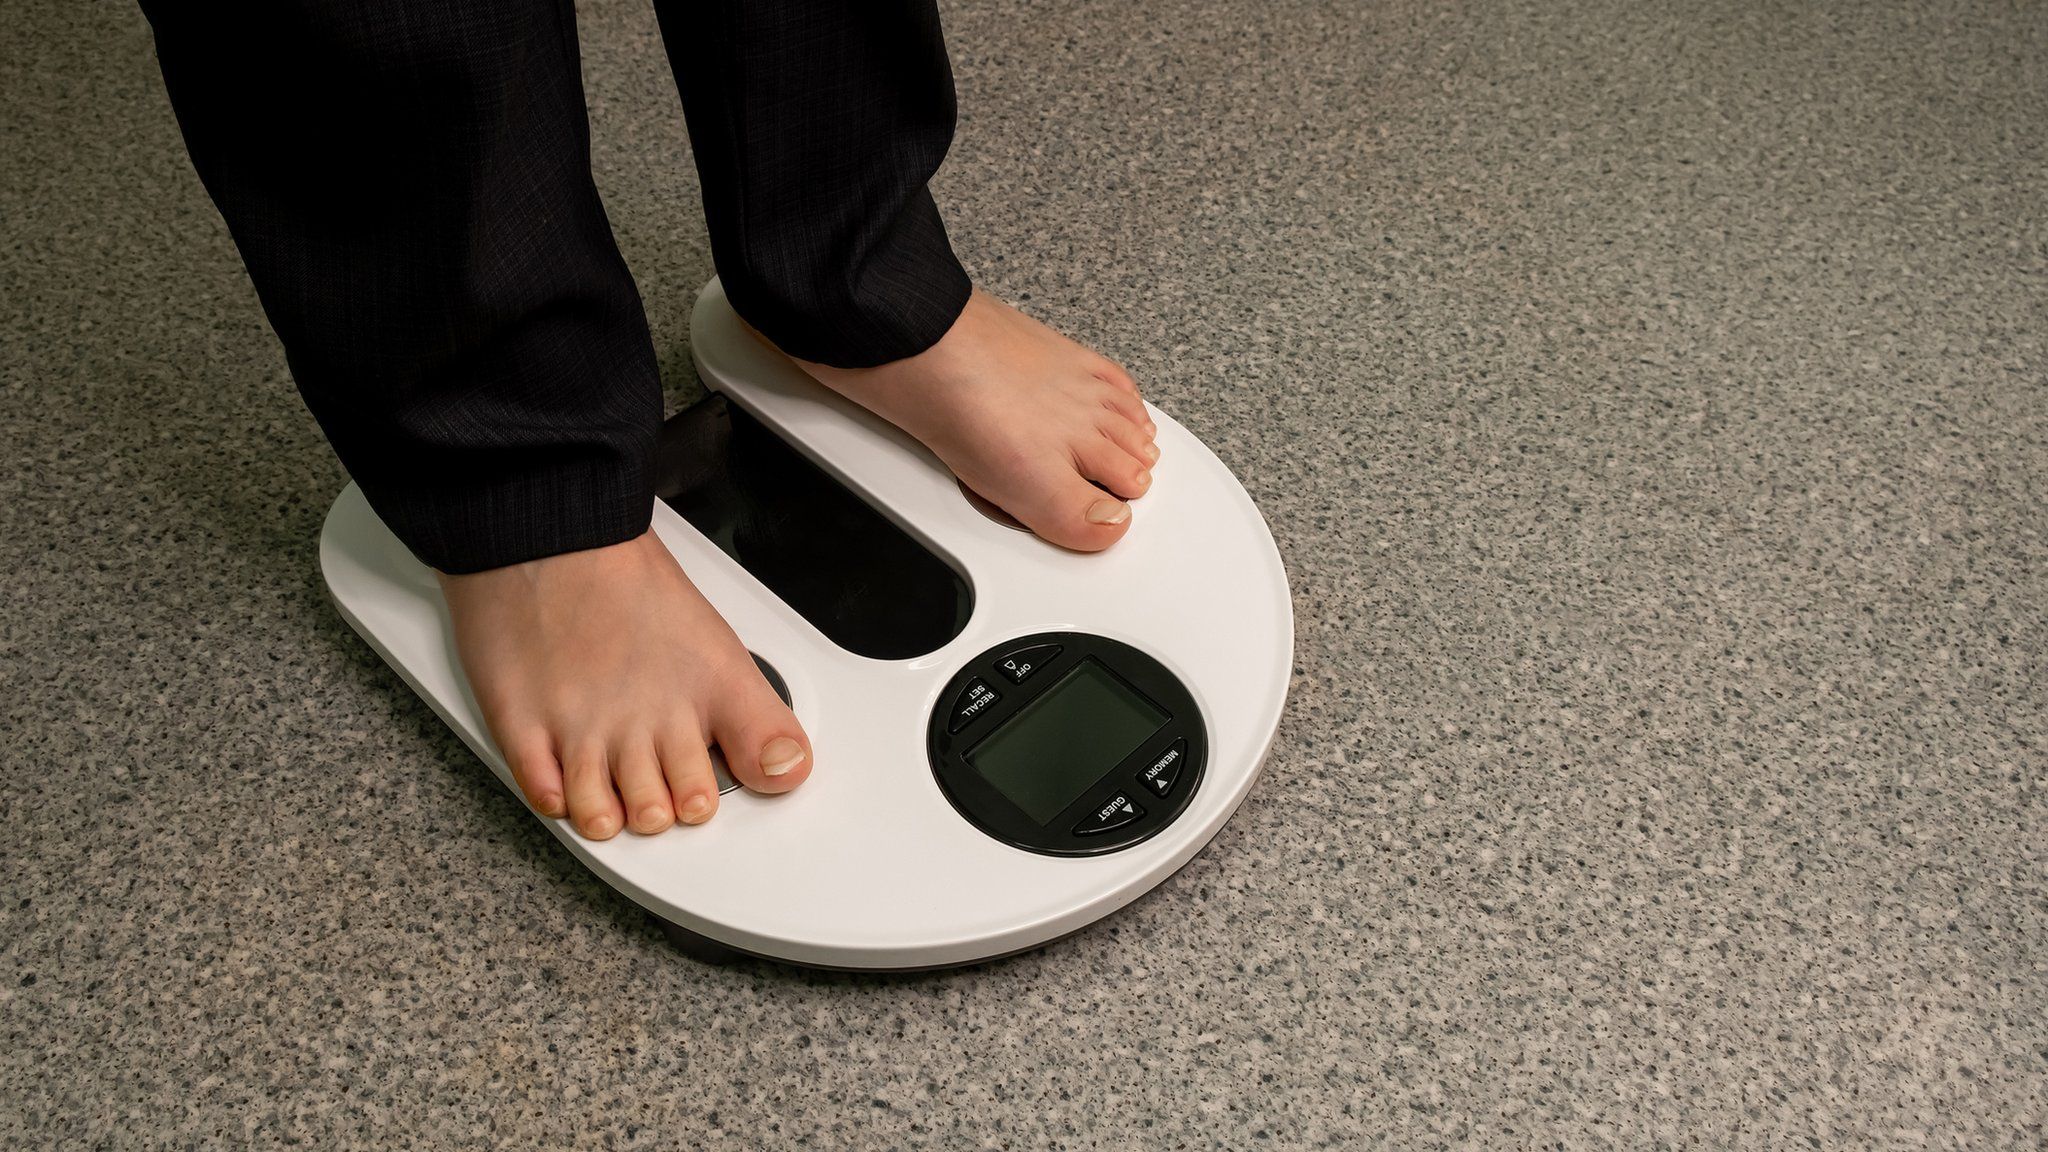 Photo of a child standing on a blank electronic scale